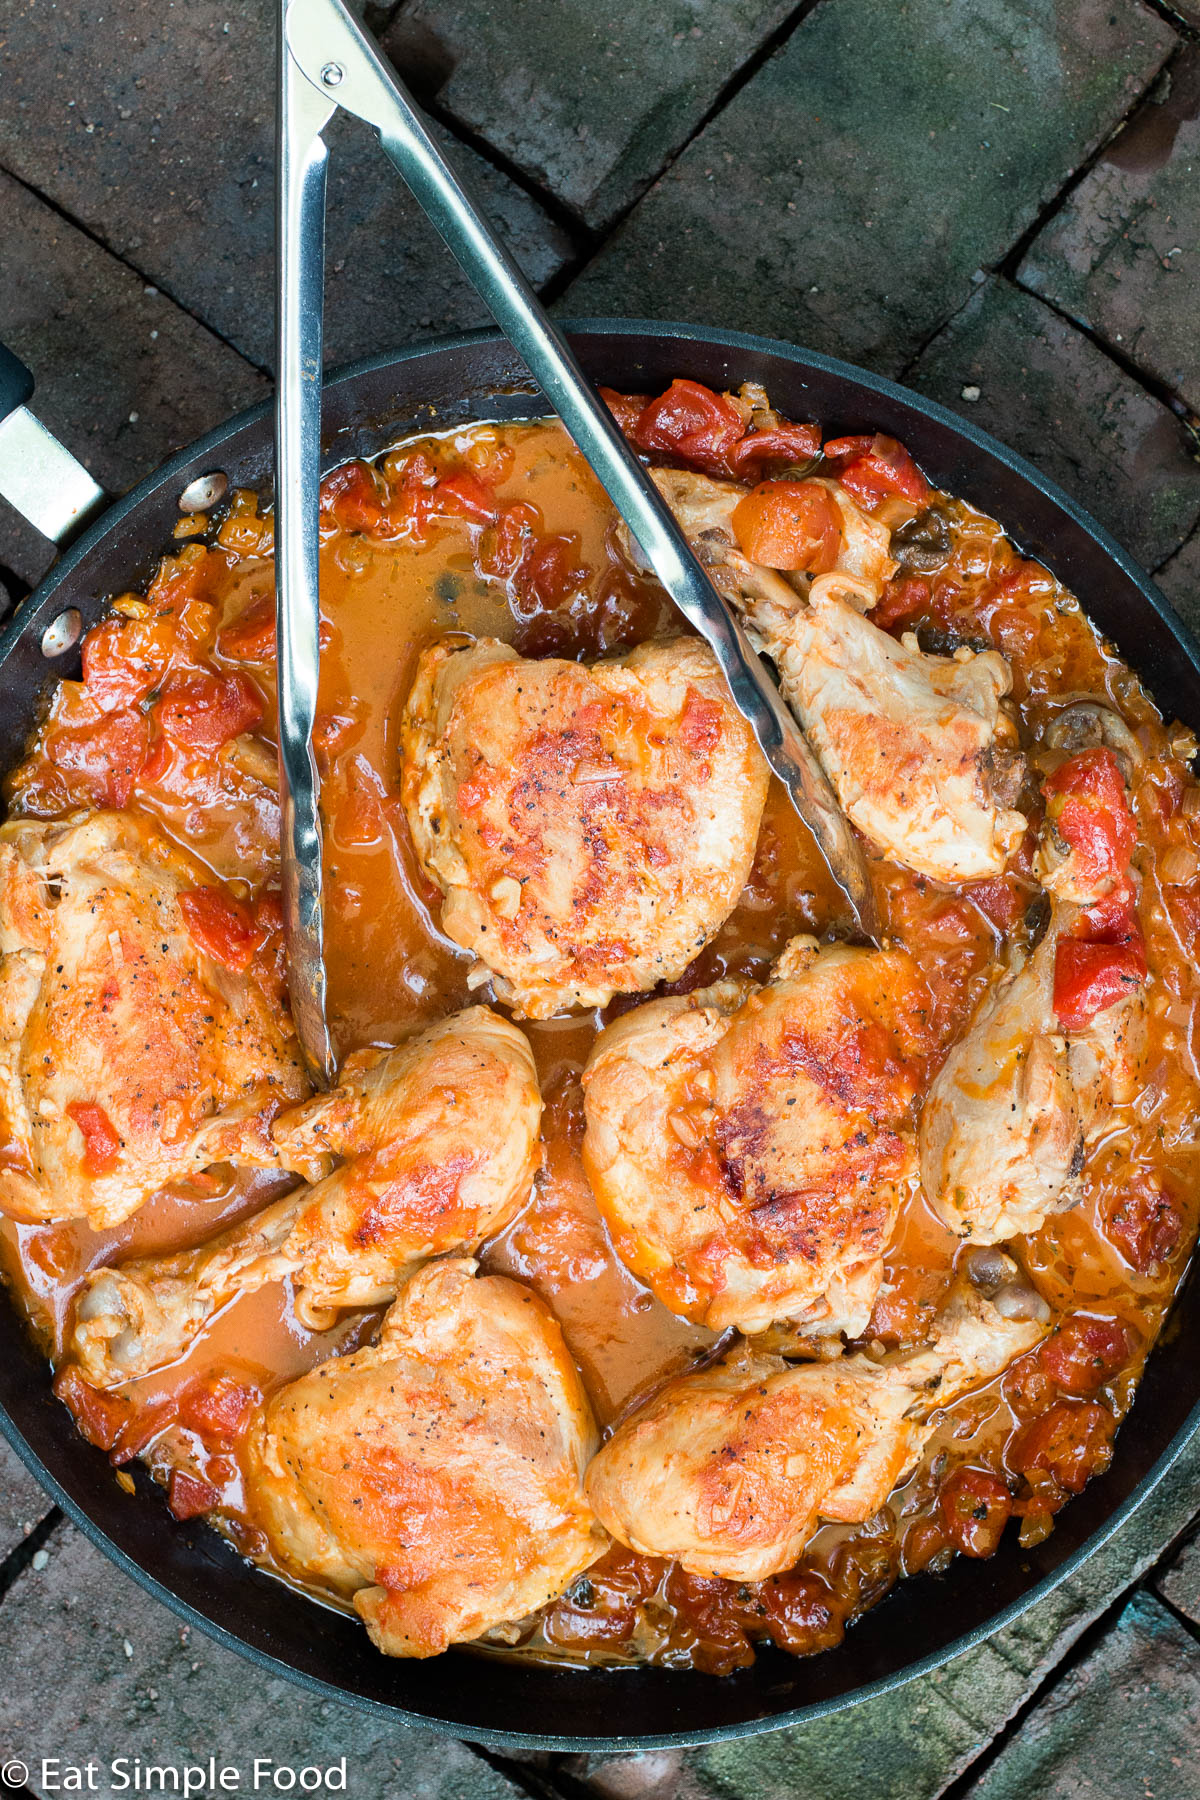 Top down view of browned chicken in a tomato and white wine sauce in a large black pan with tongs hanging out the side.